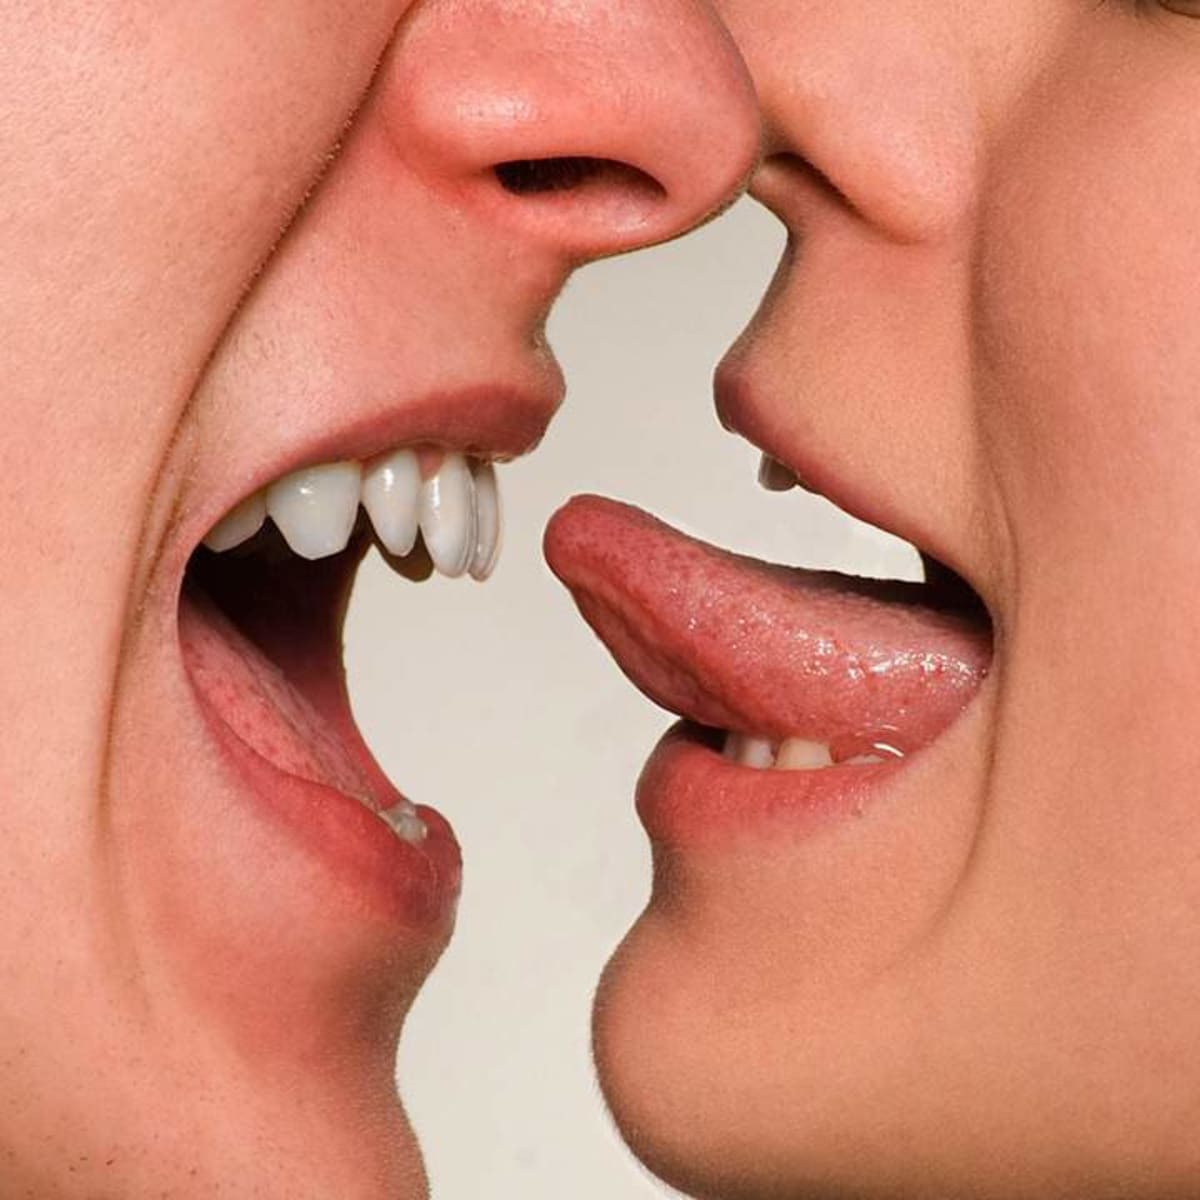 Kissing with tongues images